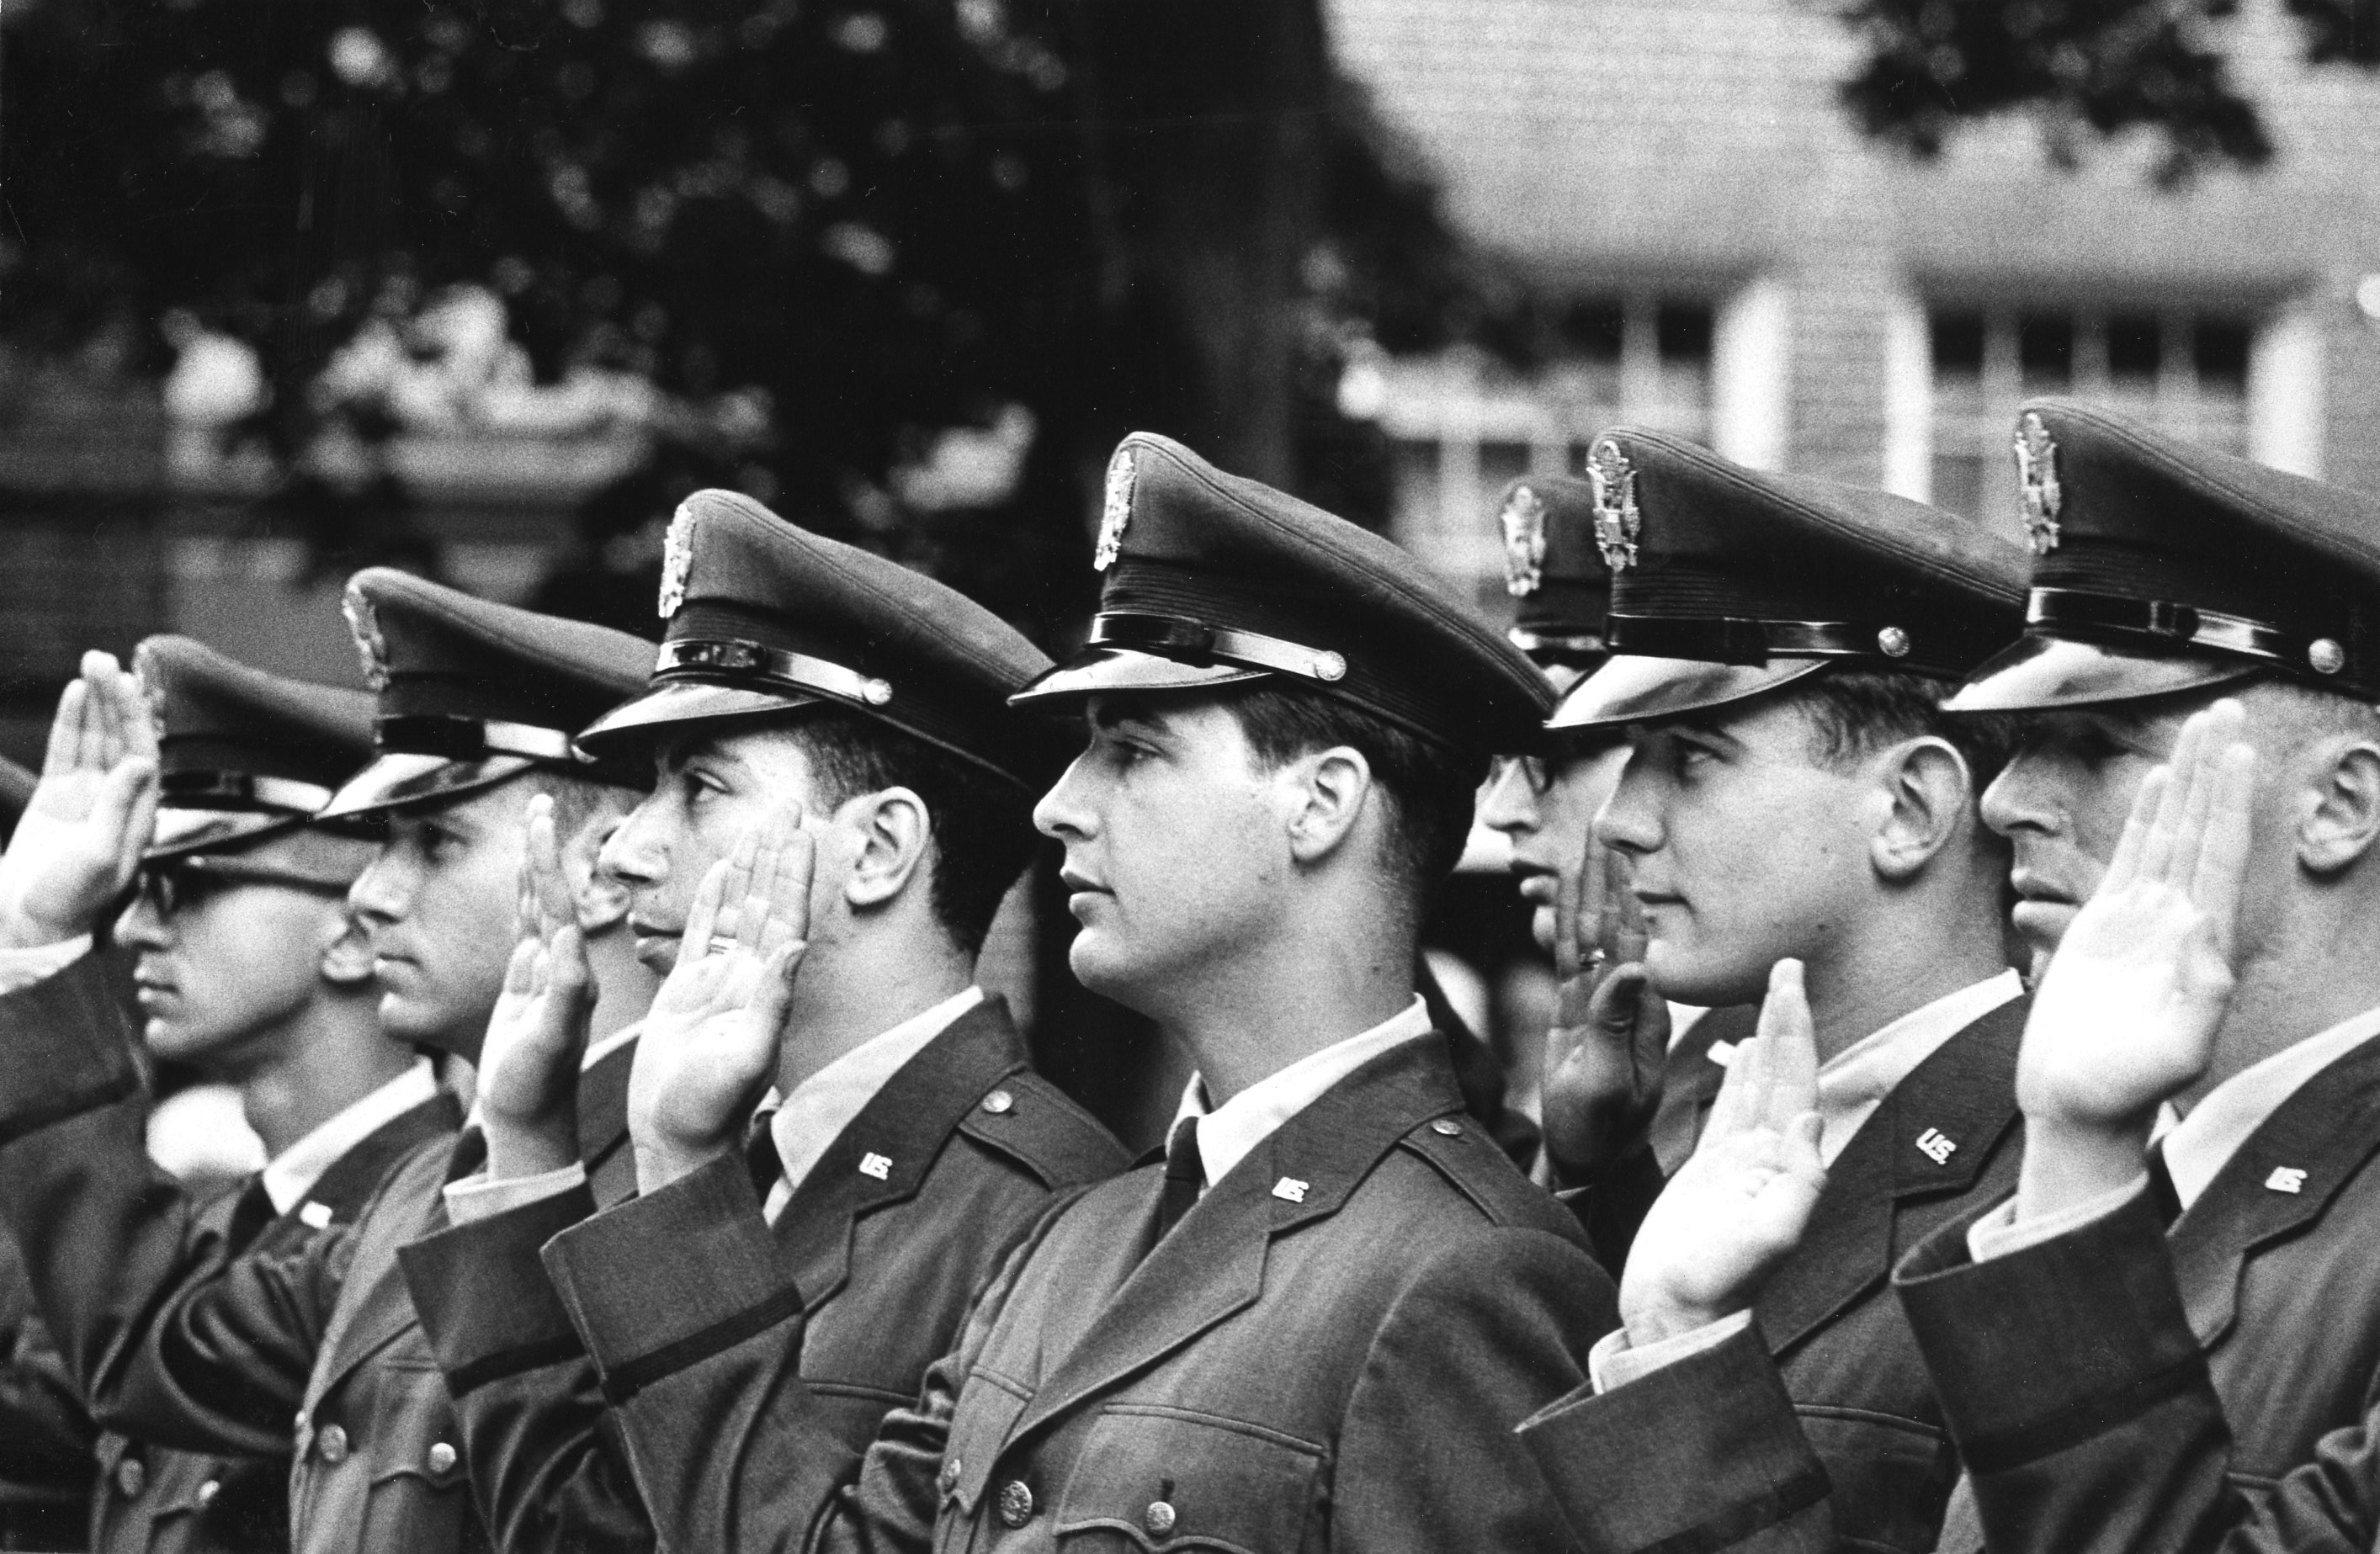 Photograph of students holding their palm up for a swearing ceremony in the 1960s